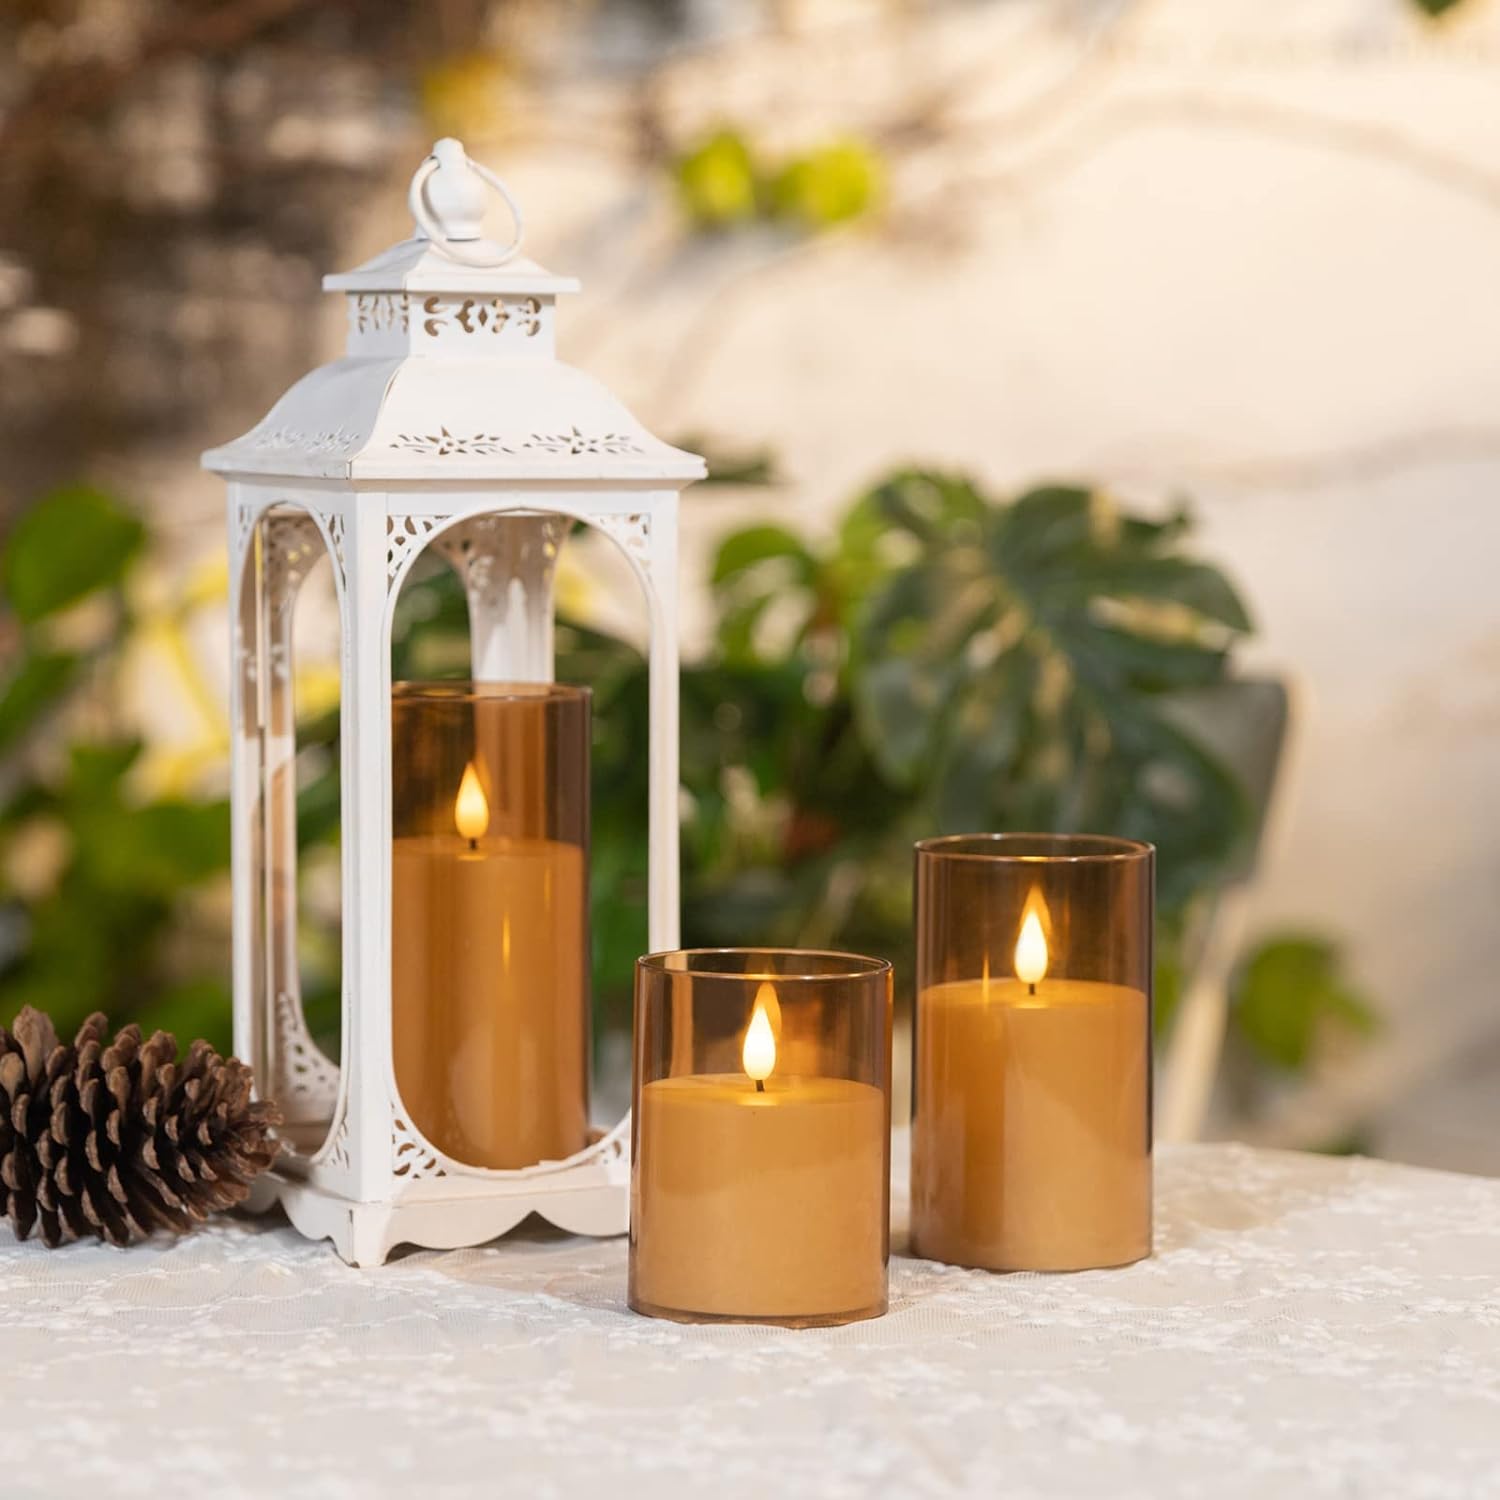 CREATE A WARM AND ROMANTIC ATMOSPHERE